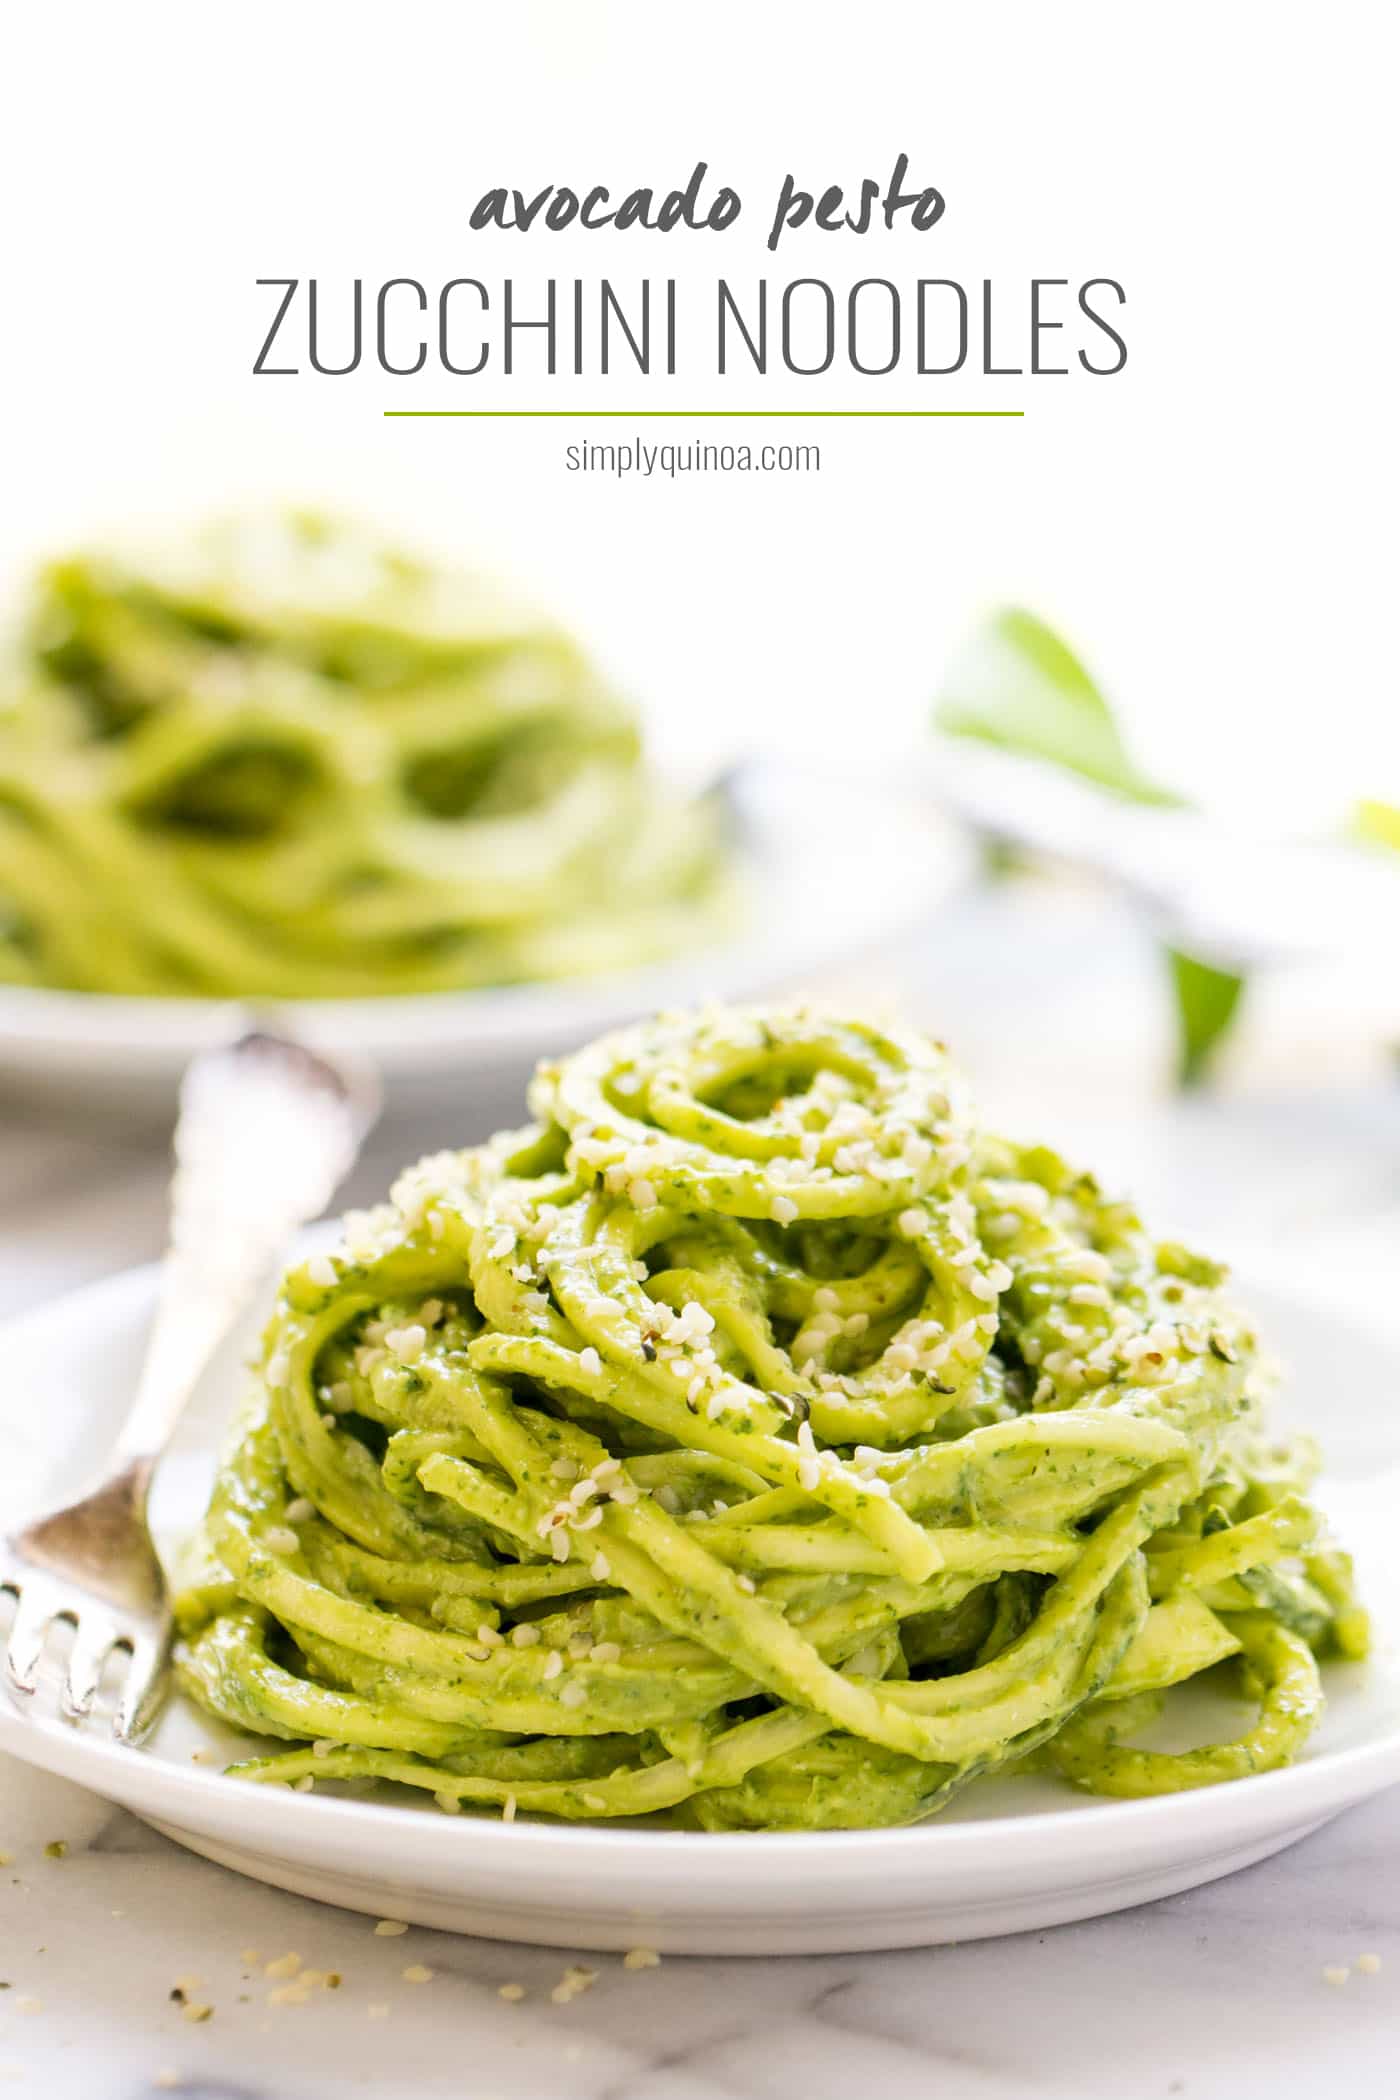 These RAW avocado pesto zucchini noodles are only 6 INGREDIENTS and they're packed with flavor + nutrition!